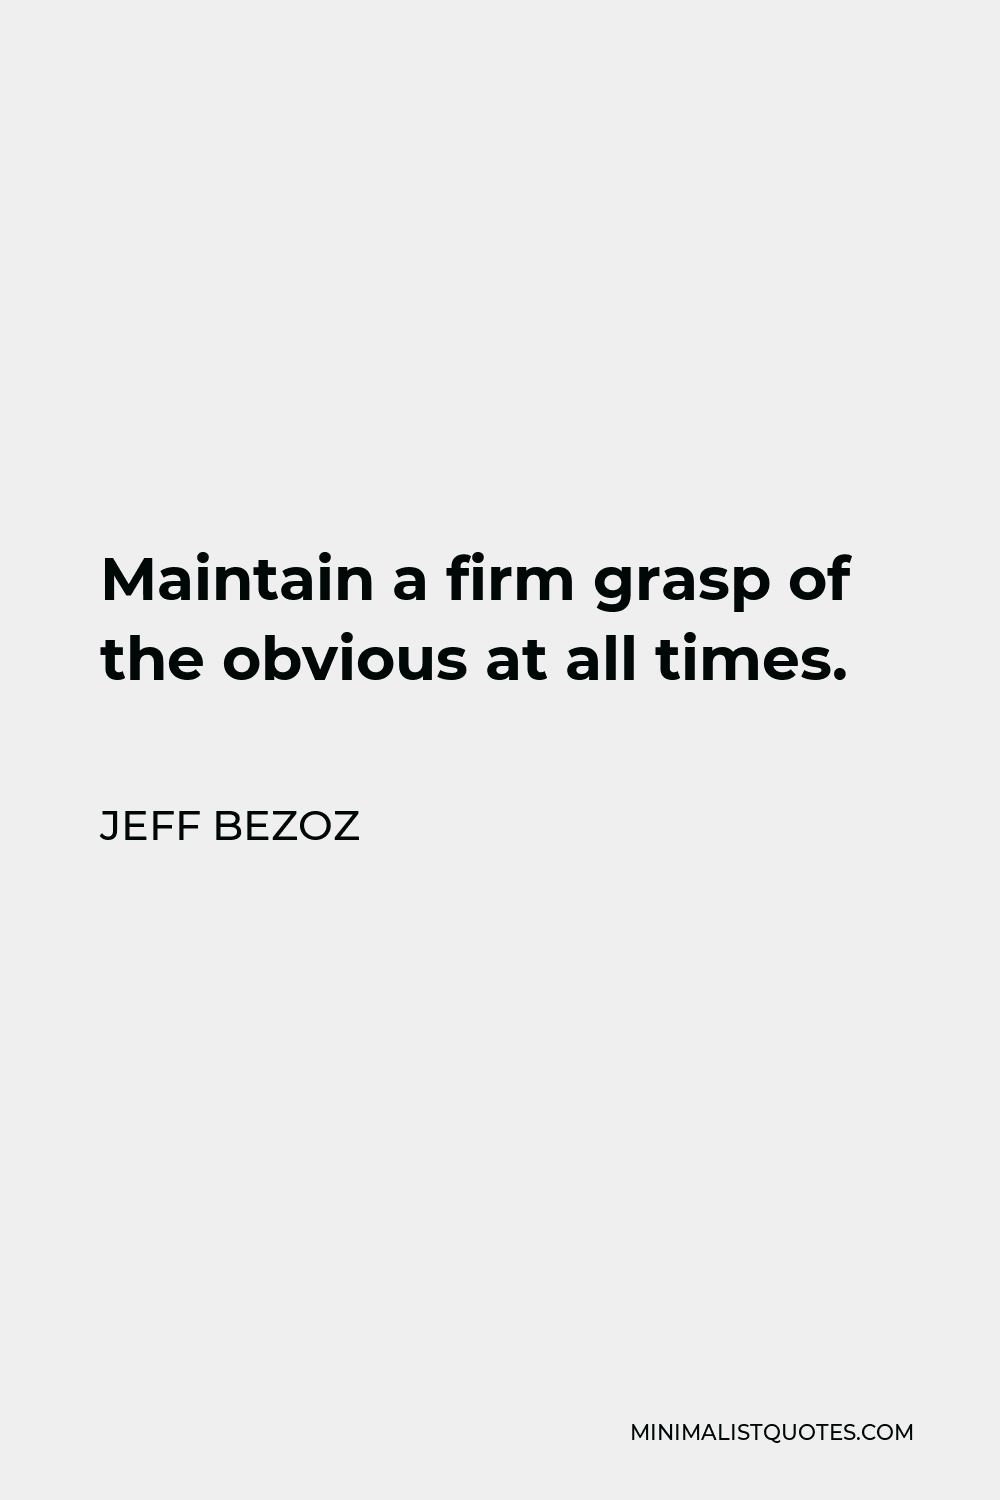 Jeff Bezoz Quote - Maintain a firm grasp of the obvious at all times.